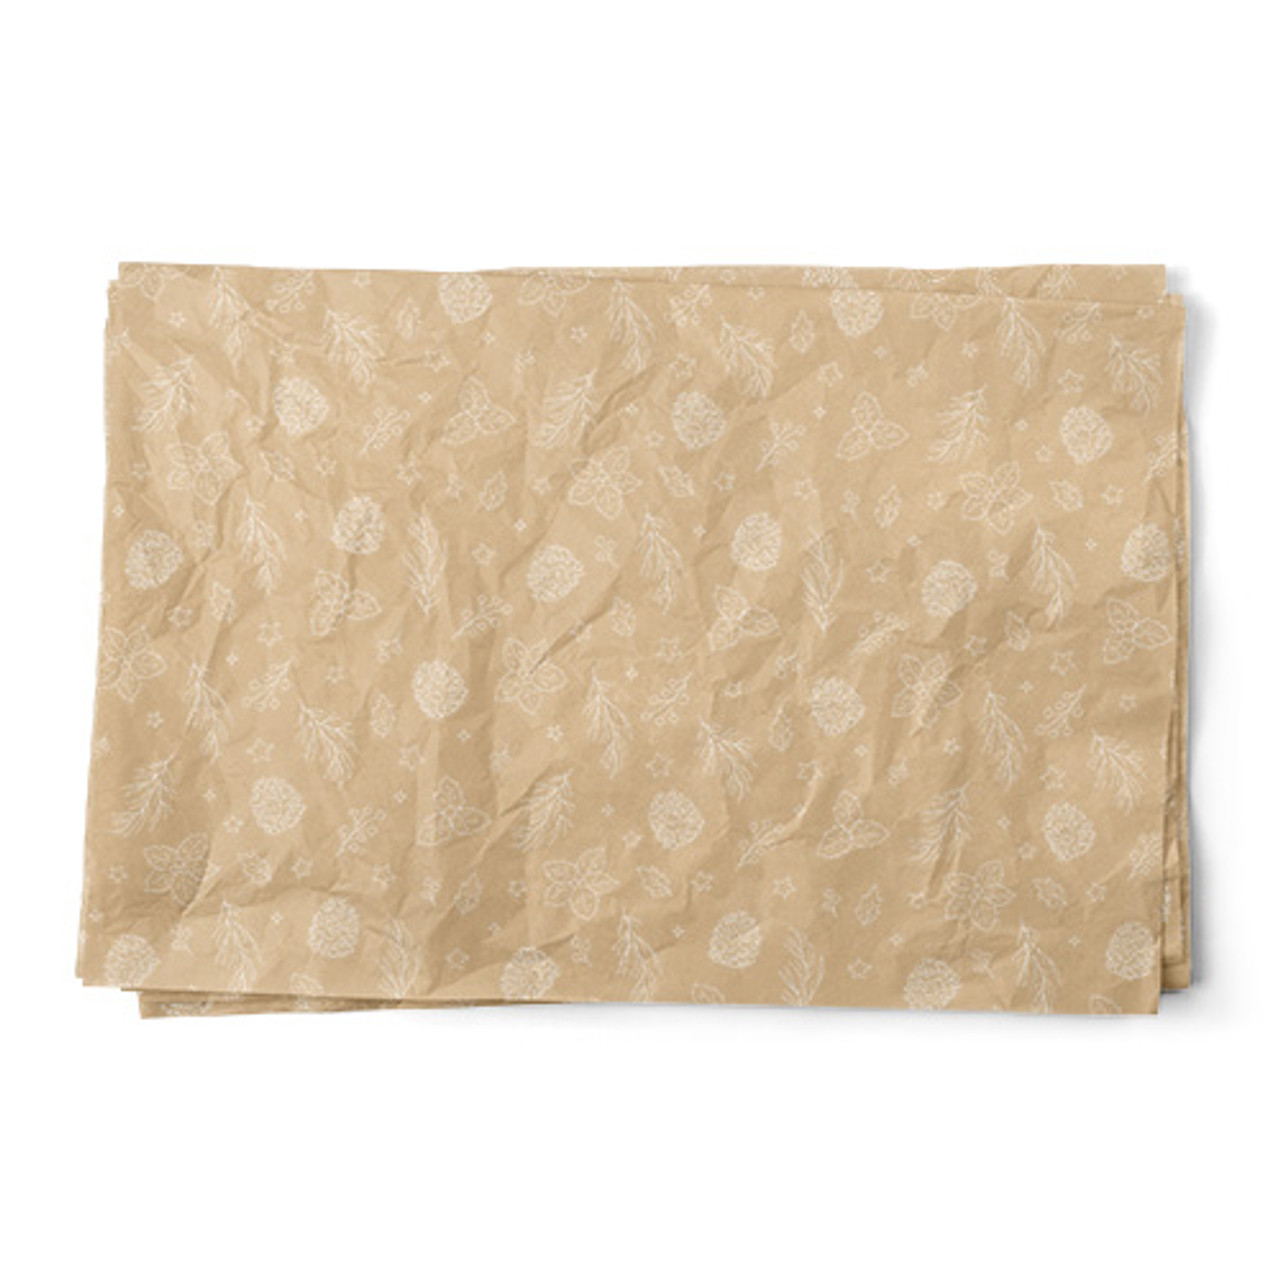 Decorative 100% Recycled Tissue Paper